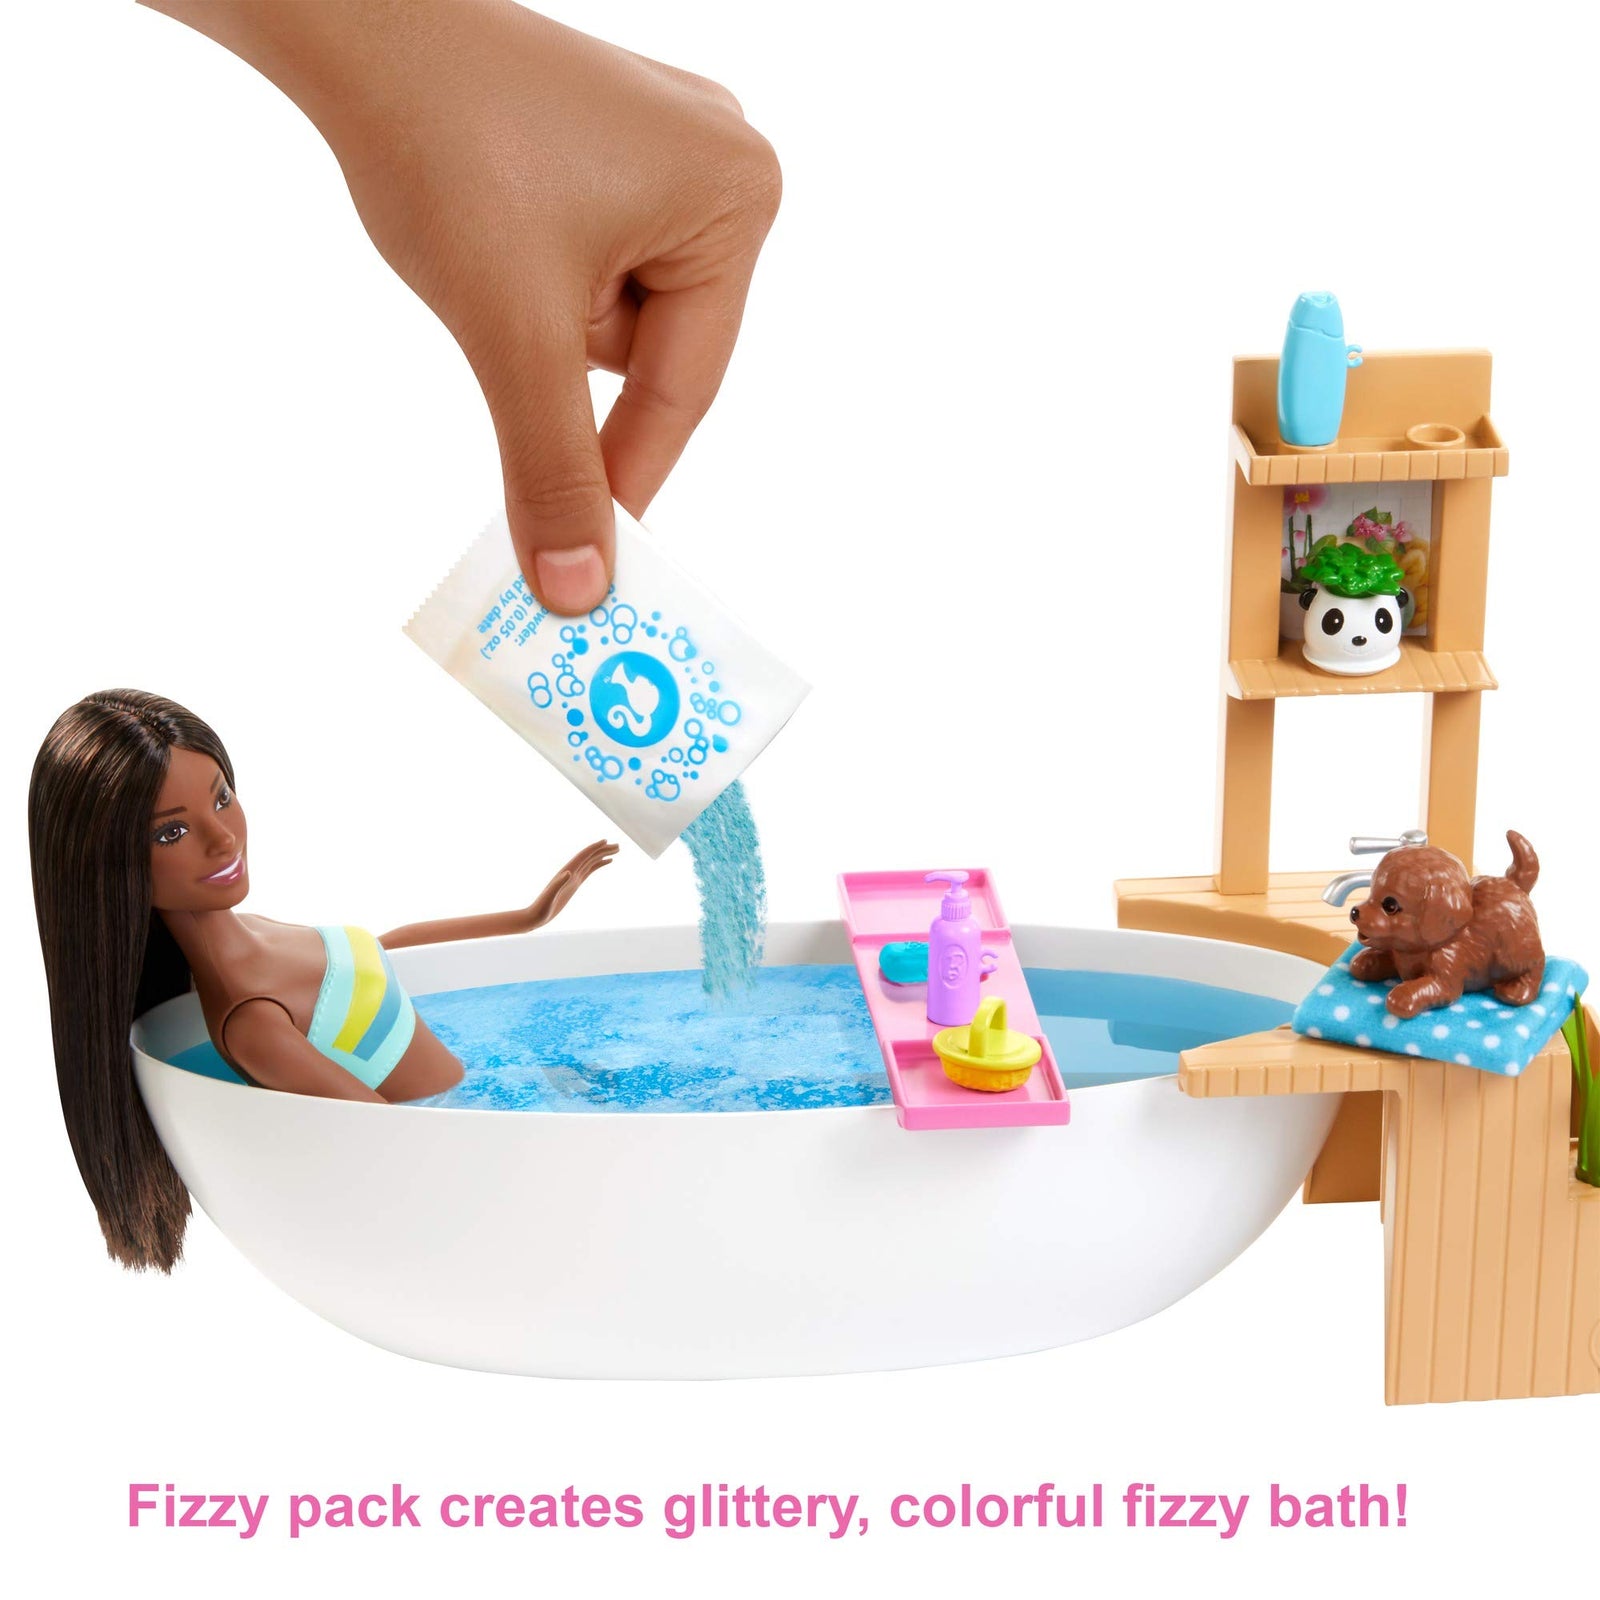 Barbie Fizzy Bath Doll & Playset, Blonde, with Tub, Fizzy Powder, Puppy & More, Gift for Kids 3 to 7 Years Old